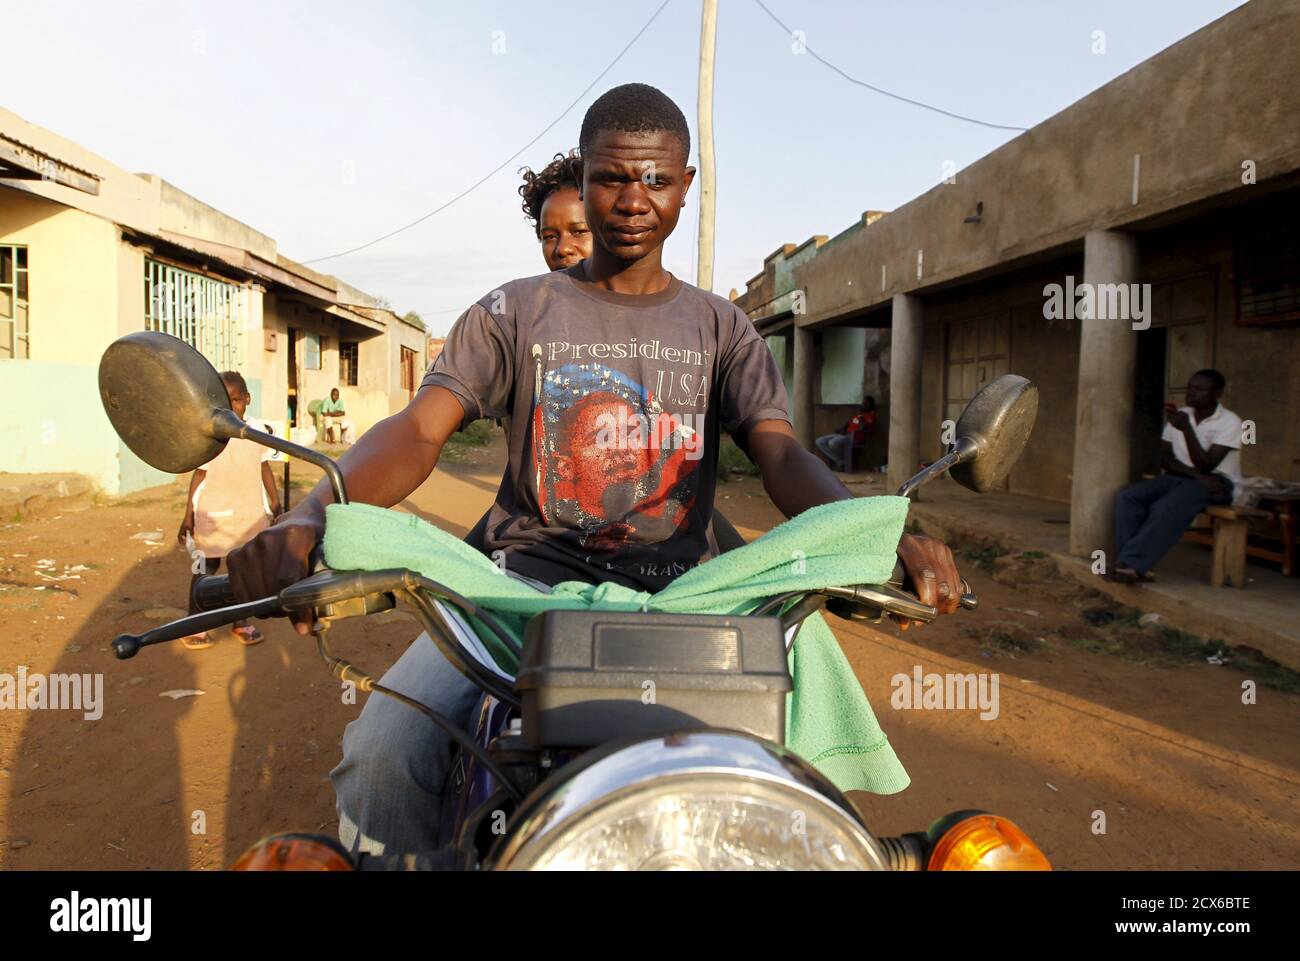 A motorcyclist taxi-driver wearing a T-shirt with the image of U.S.  President Barack Obama carries a passenger at the trading centre in the  village of Kogelo, west of Kenya's capital Nairobi, July